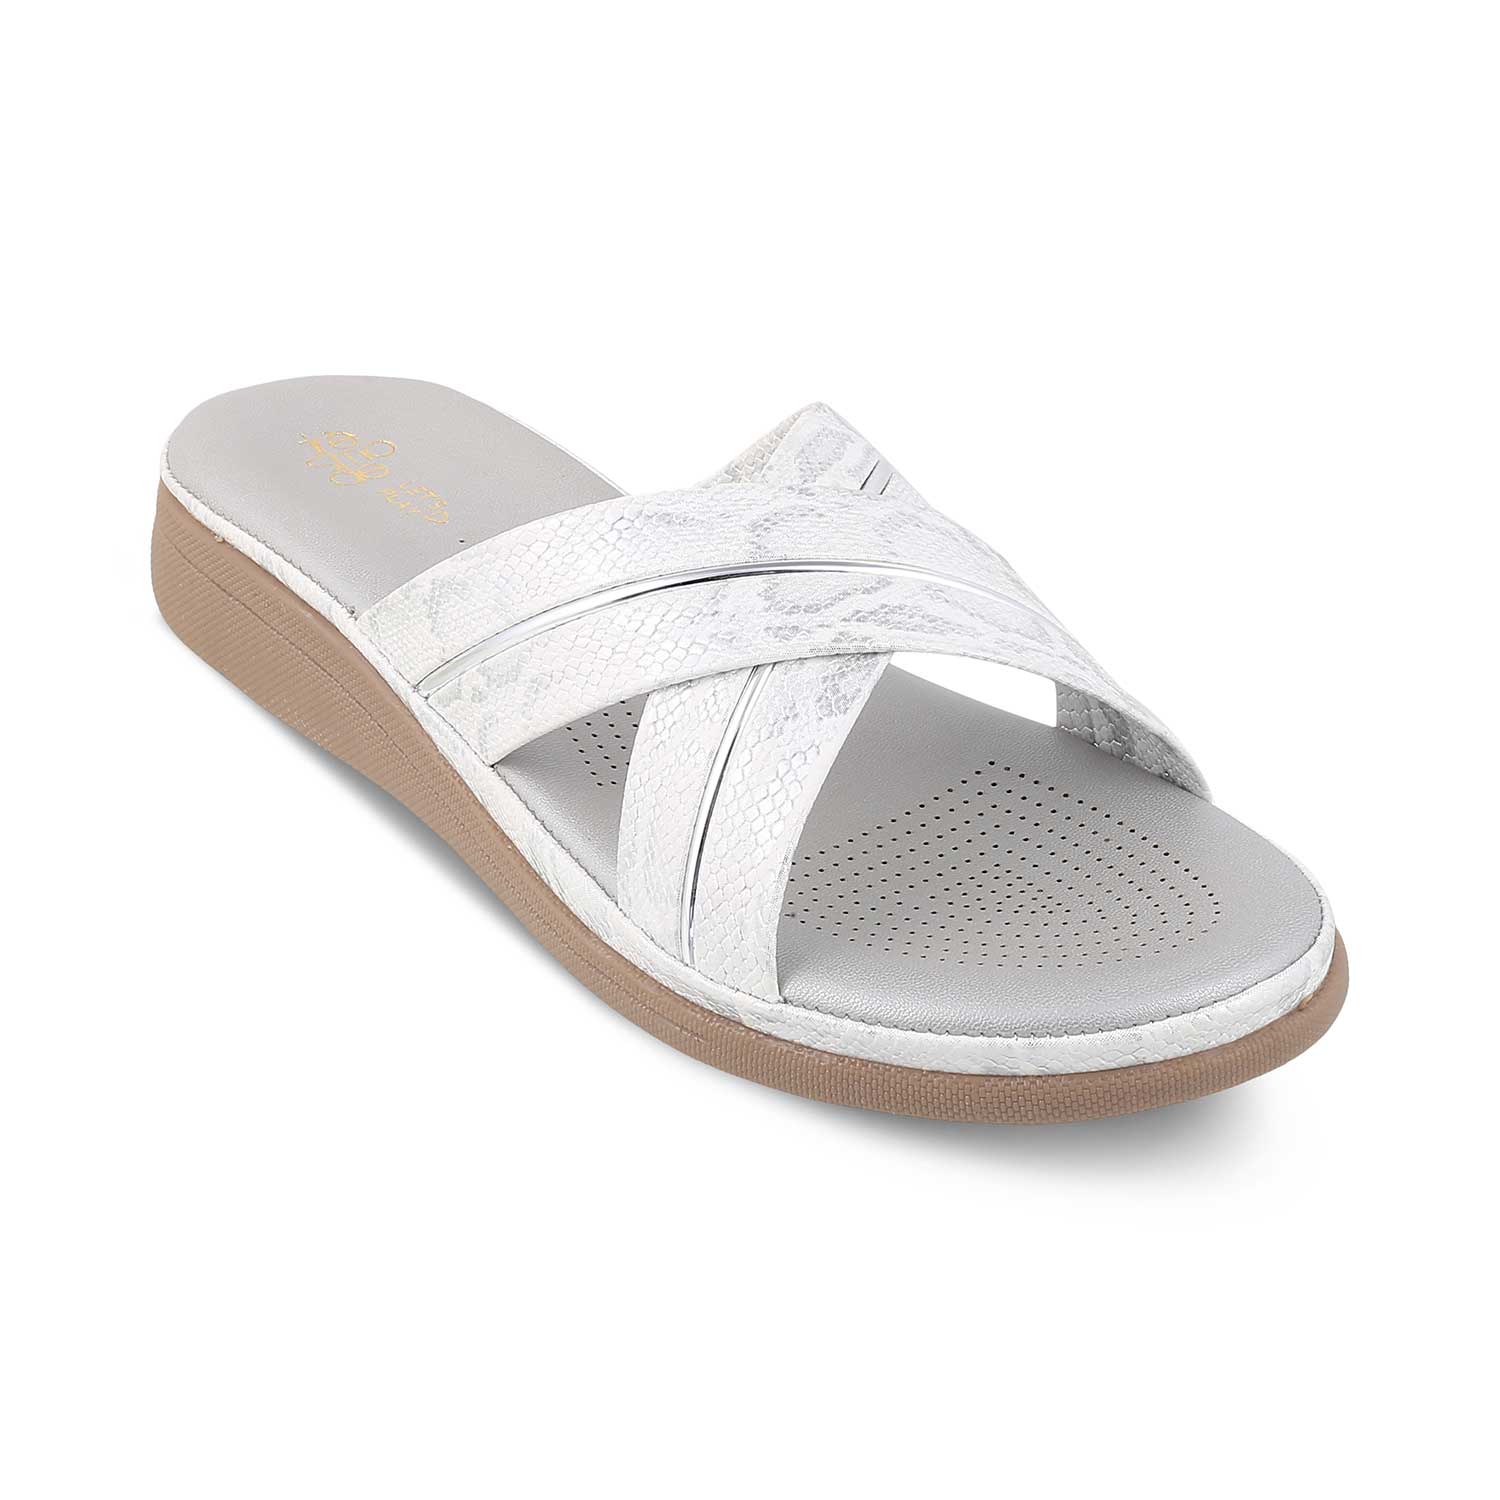 The Slide Silver Women's Casual Flats Tresmode